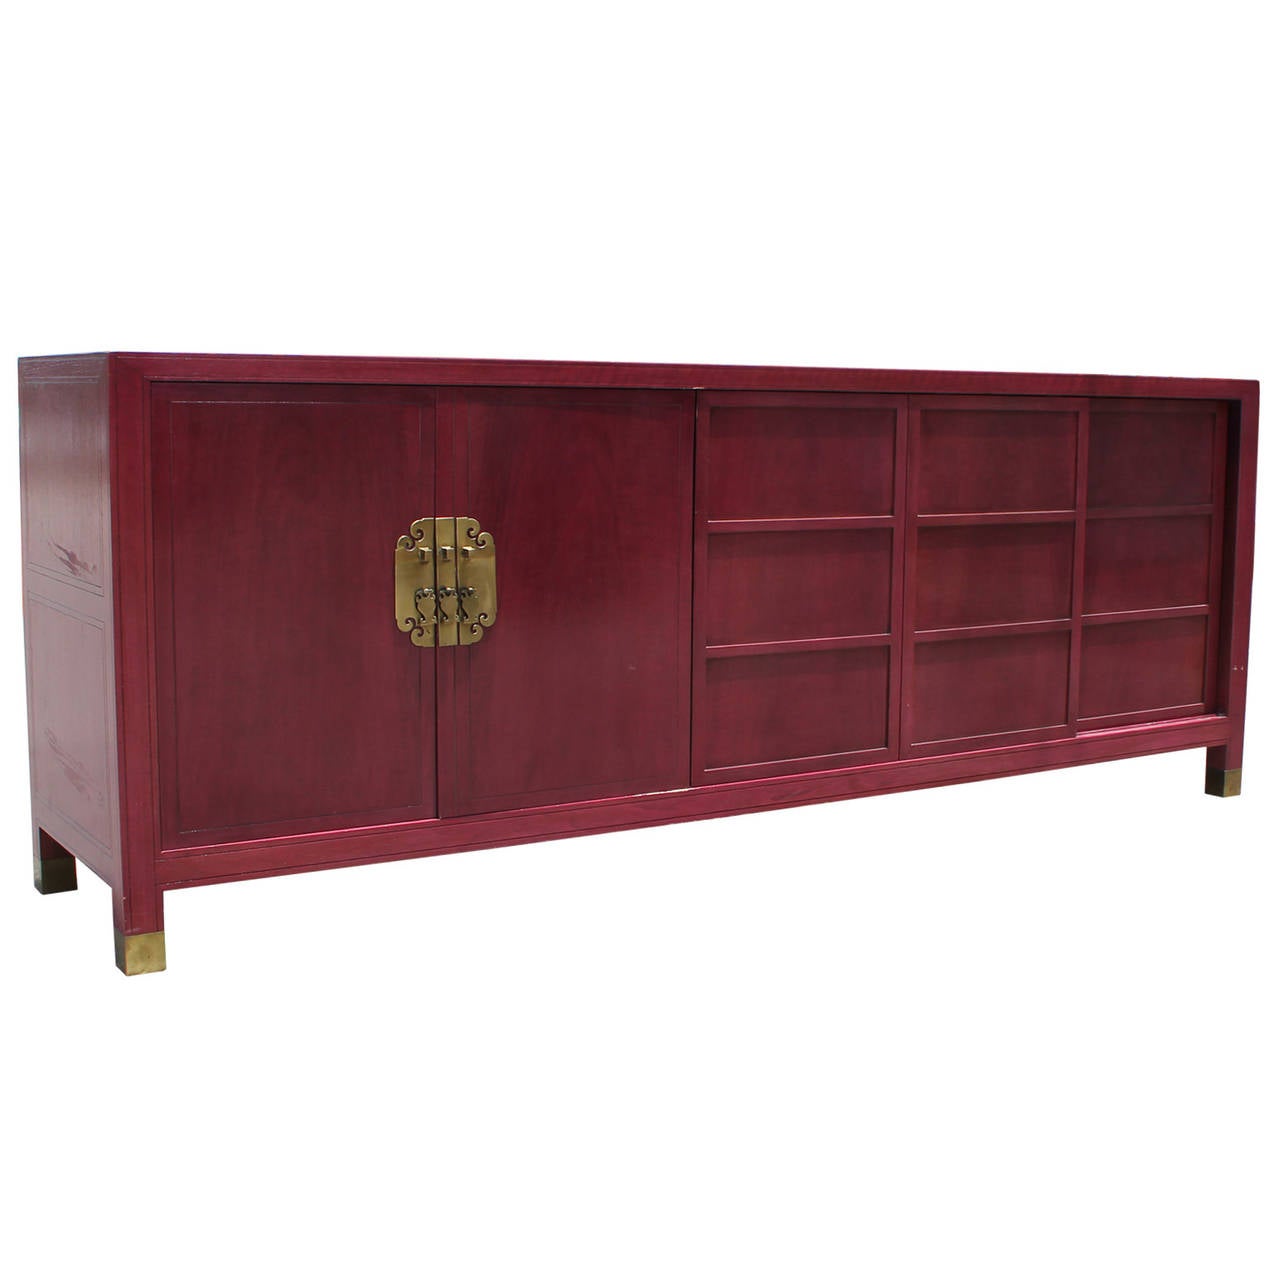 Gorgeous Baker Far East Collection raspberry stained sideboard. Hinged doors with large solid brass asian hardware open to reveal scalloped drawers. Three paneled sliding doors open to a single shelf. Top is adorned with a trio of engraved borders.